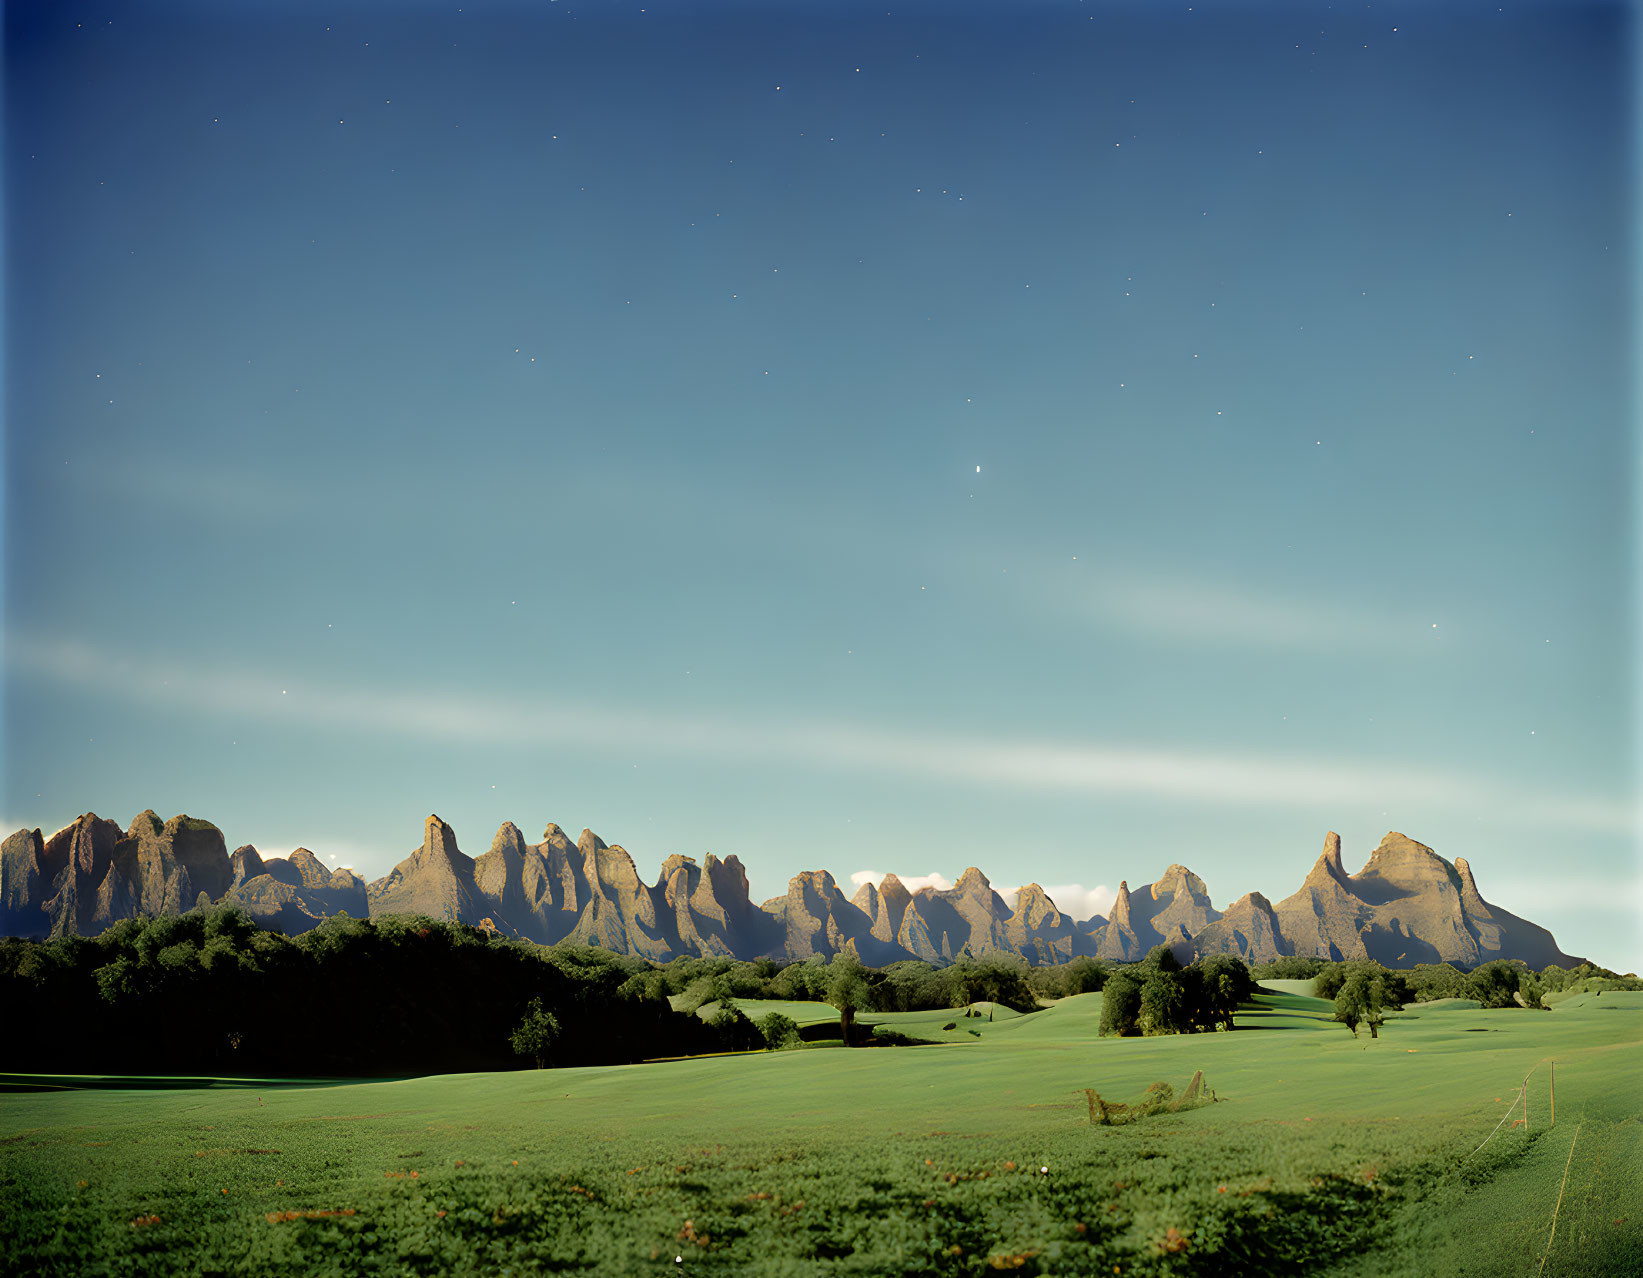 Mountain Range Landscape Transitioning from Day to Night Sky